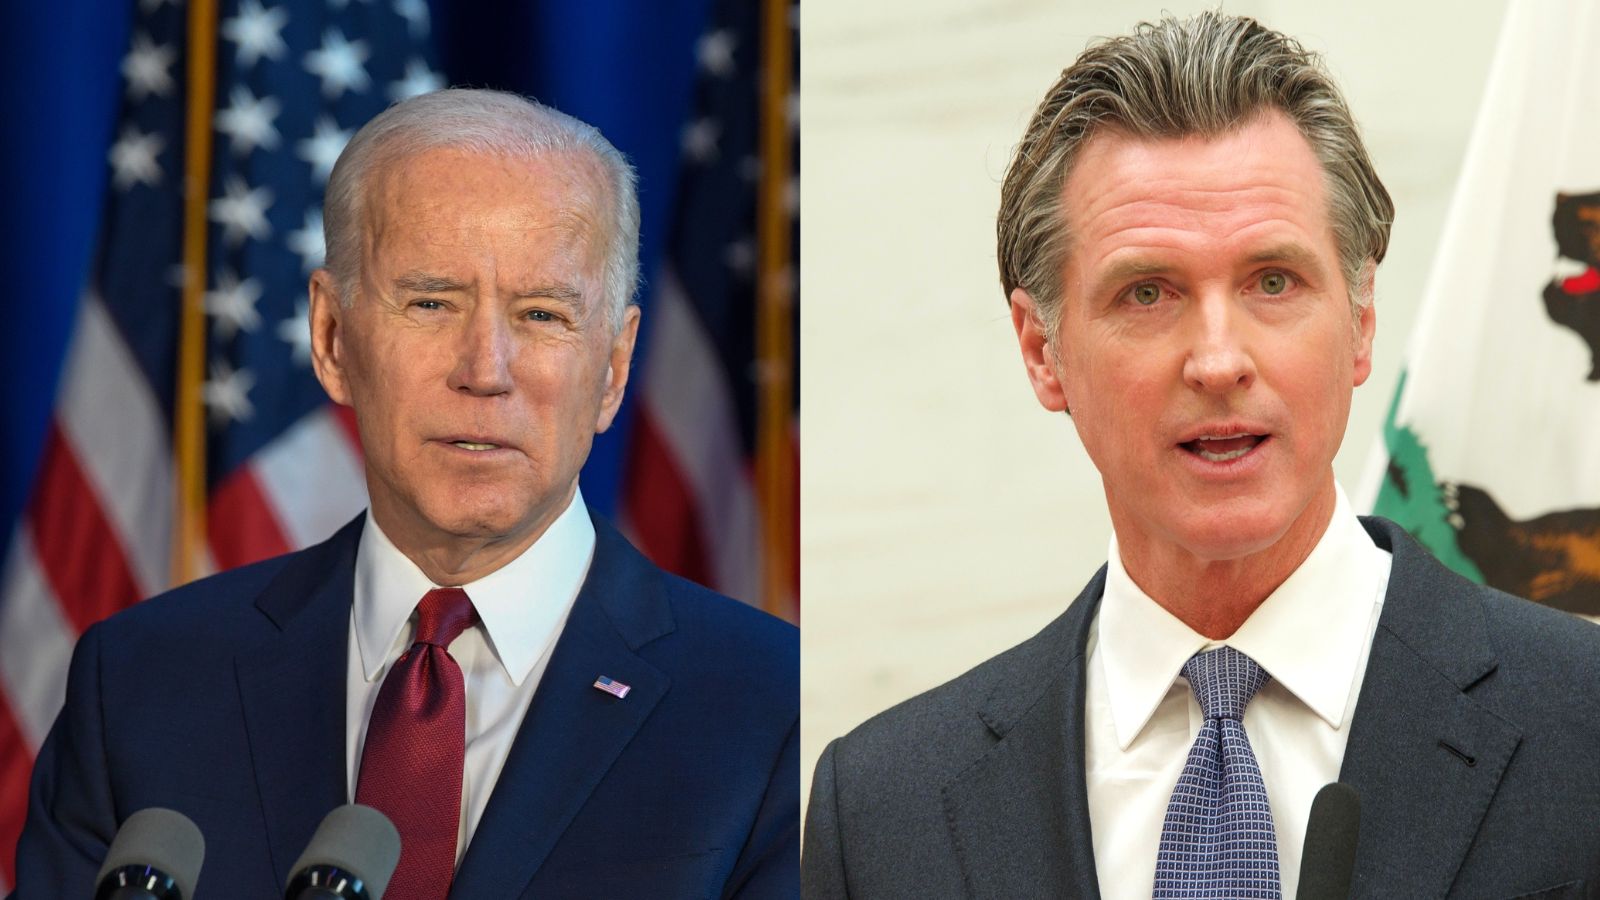 “We Don’t Need Another Democrat That Can’t Walk and Chew Gum at the Same Time”: Biden Touts Gavin Newsom as Replacement for 2024 Presidential Election